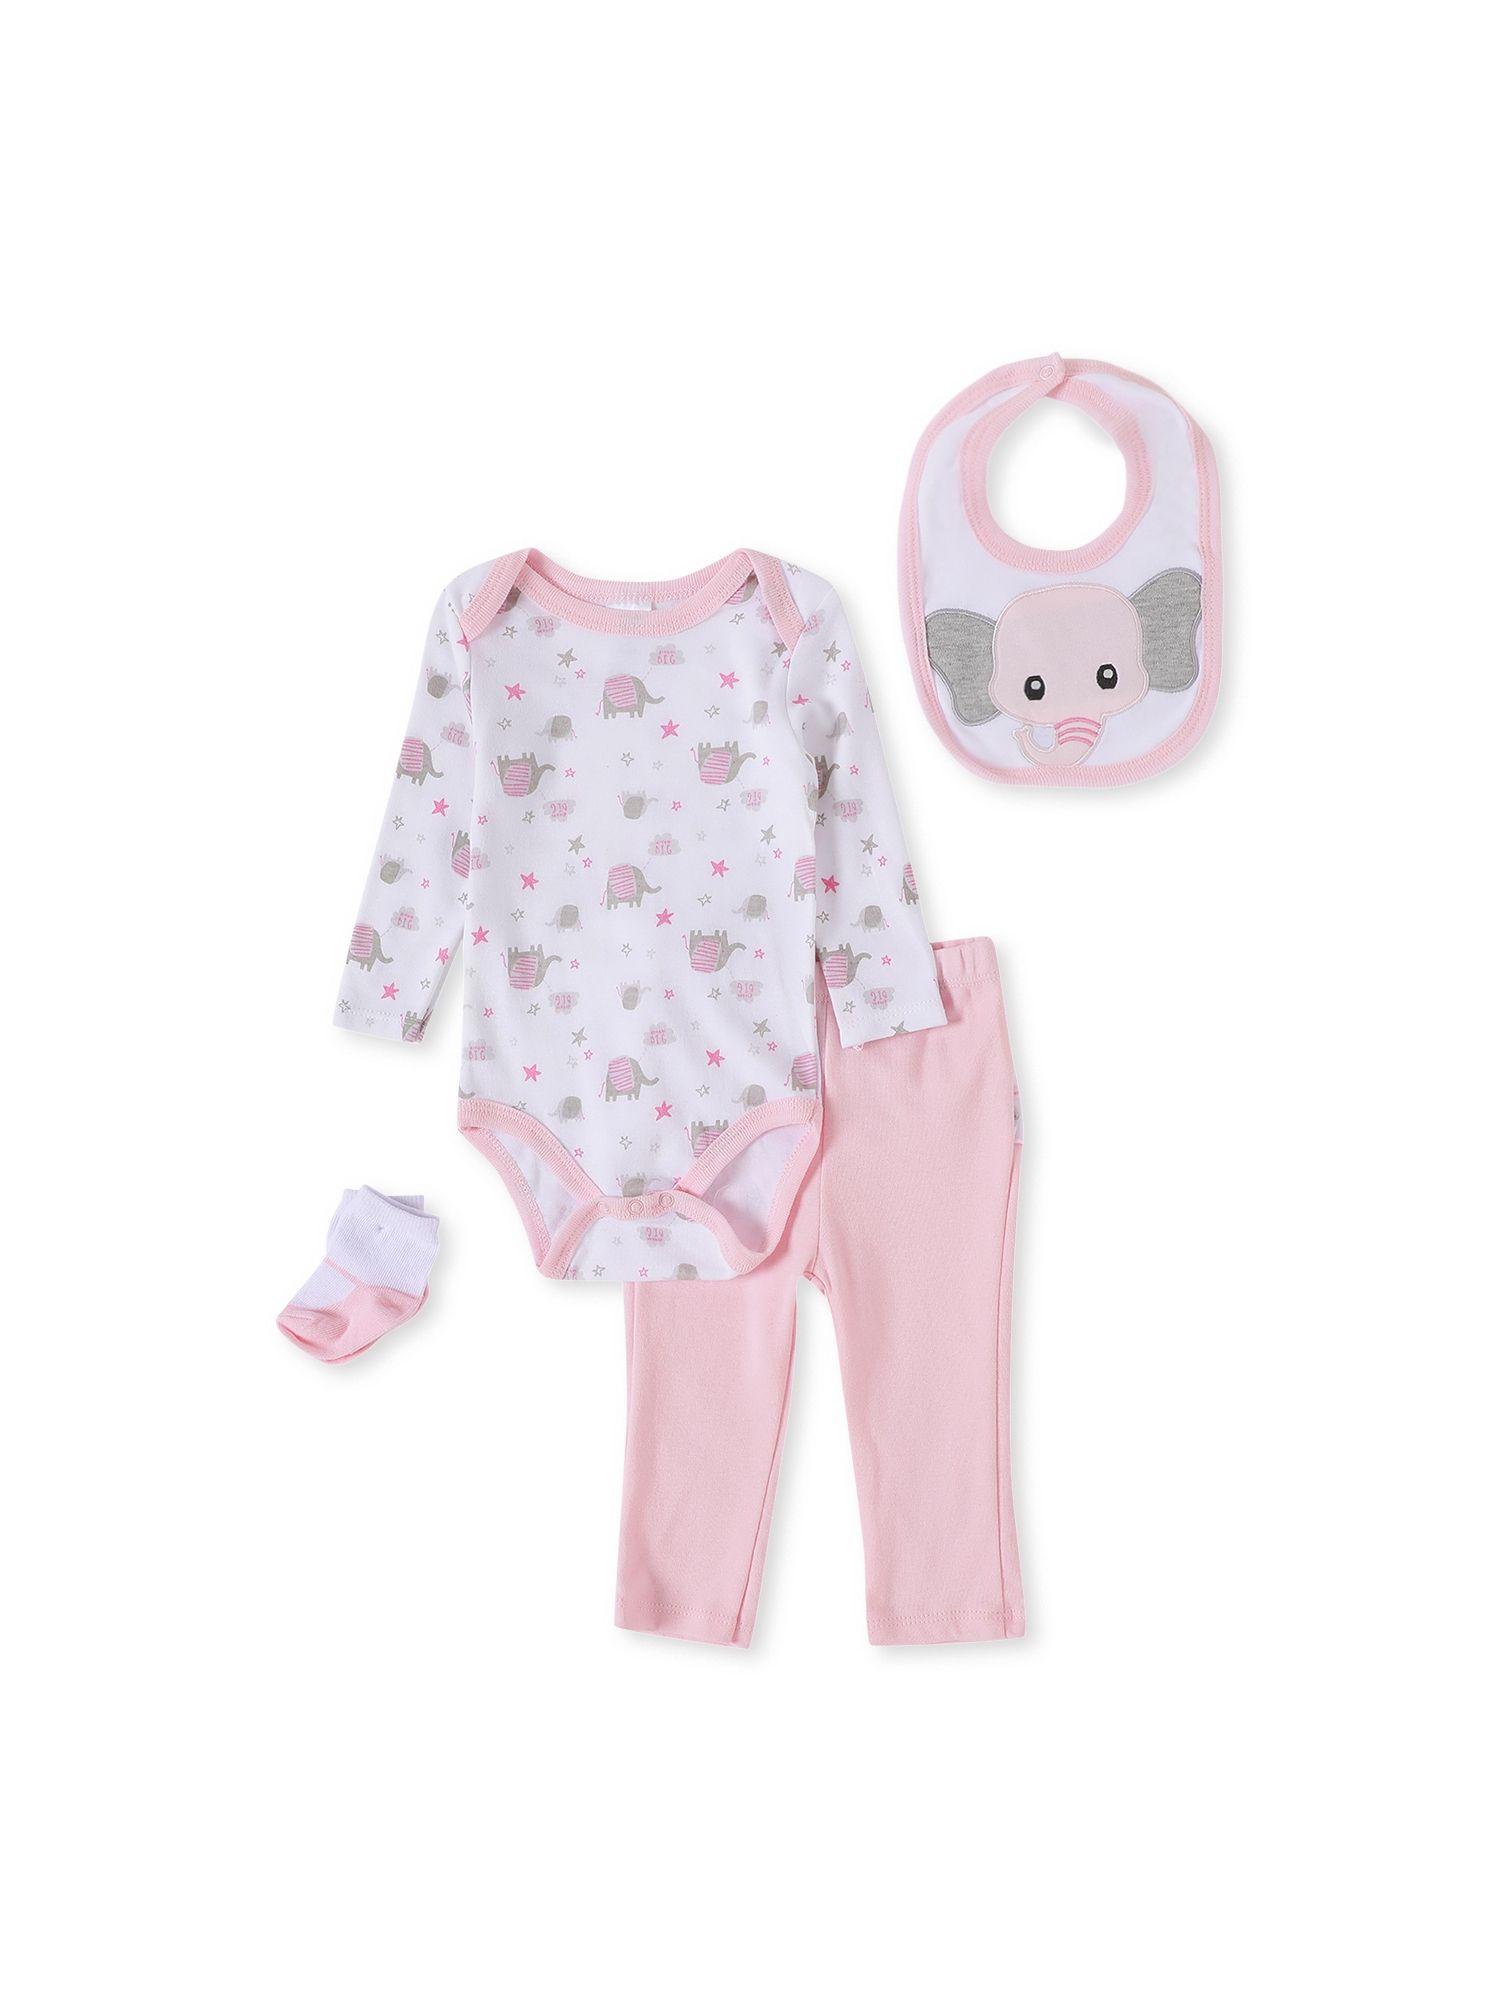 elephant parade pink onesies with leggings (set of 4)